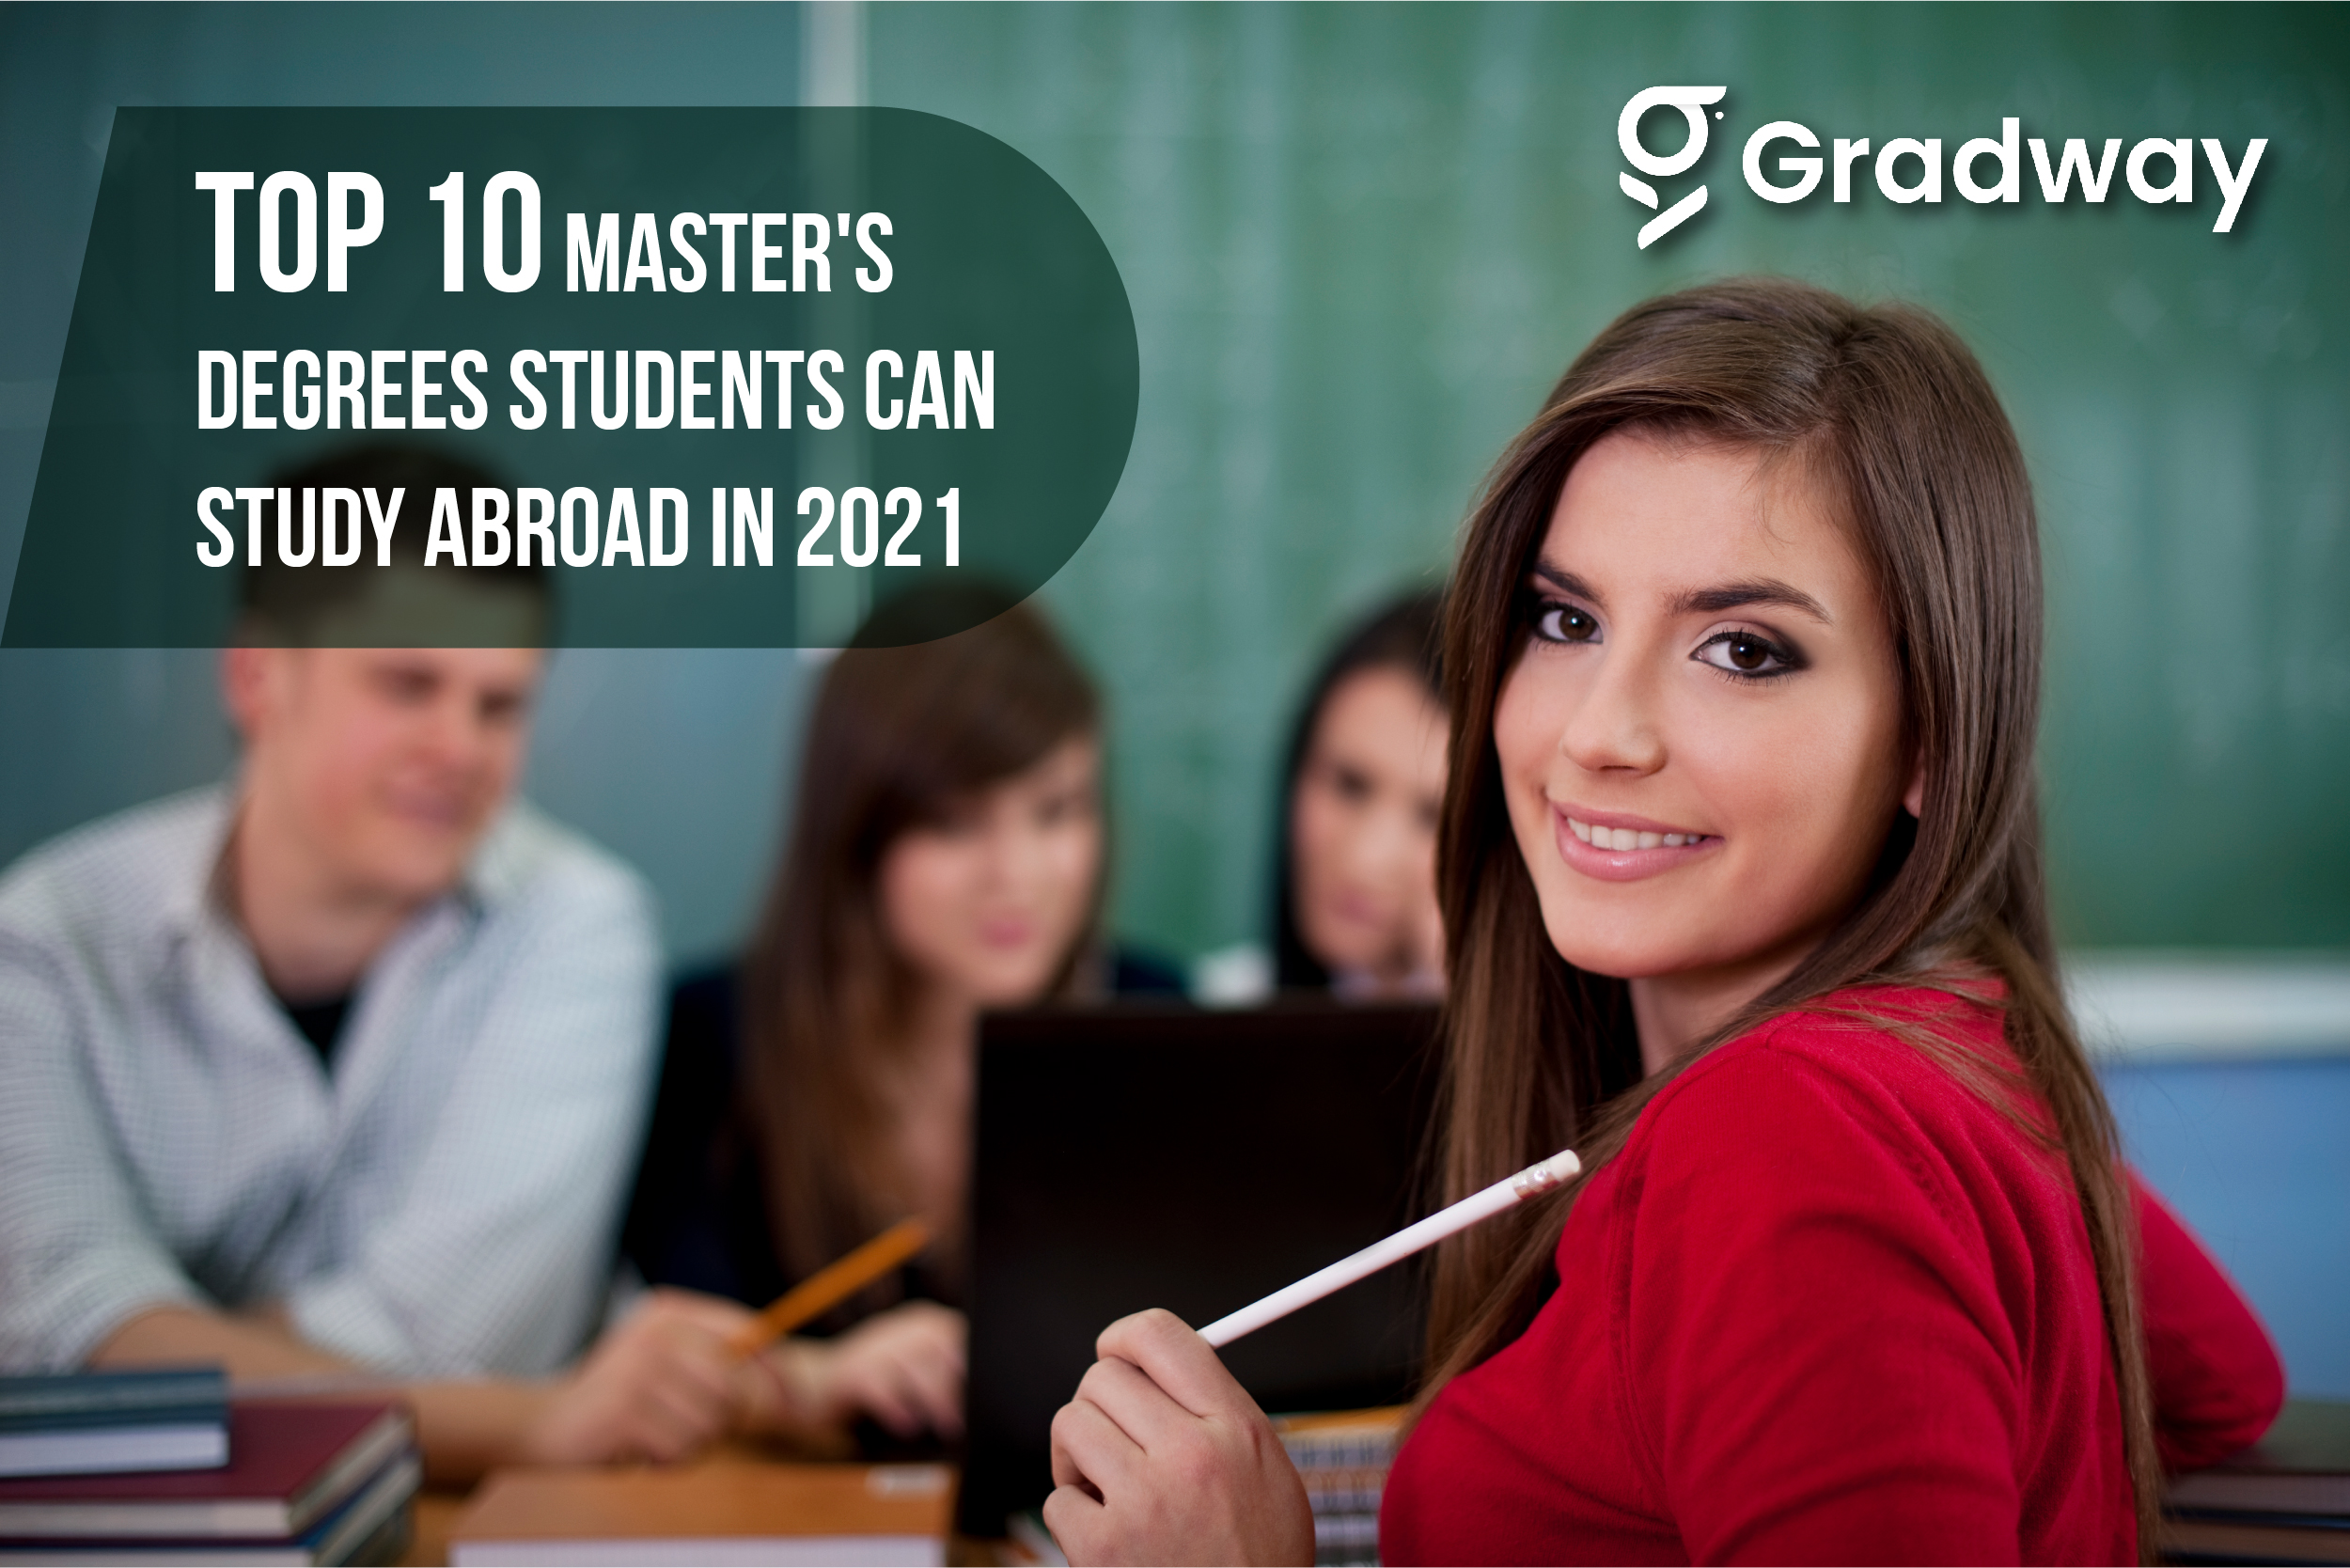 Top 10 Masters Degrees You Can Study Abroad in 2021 | Gradway